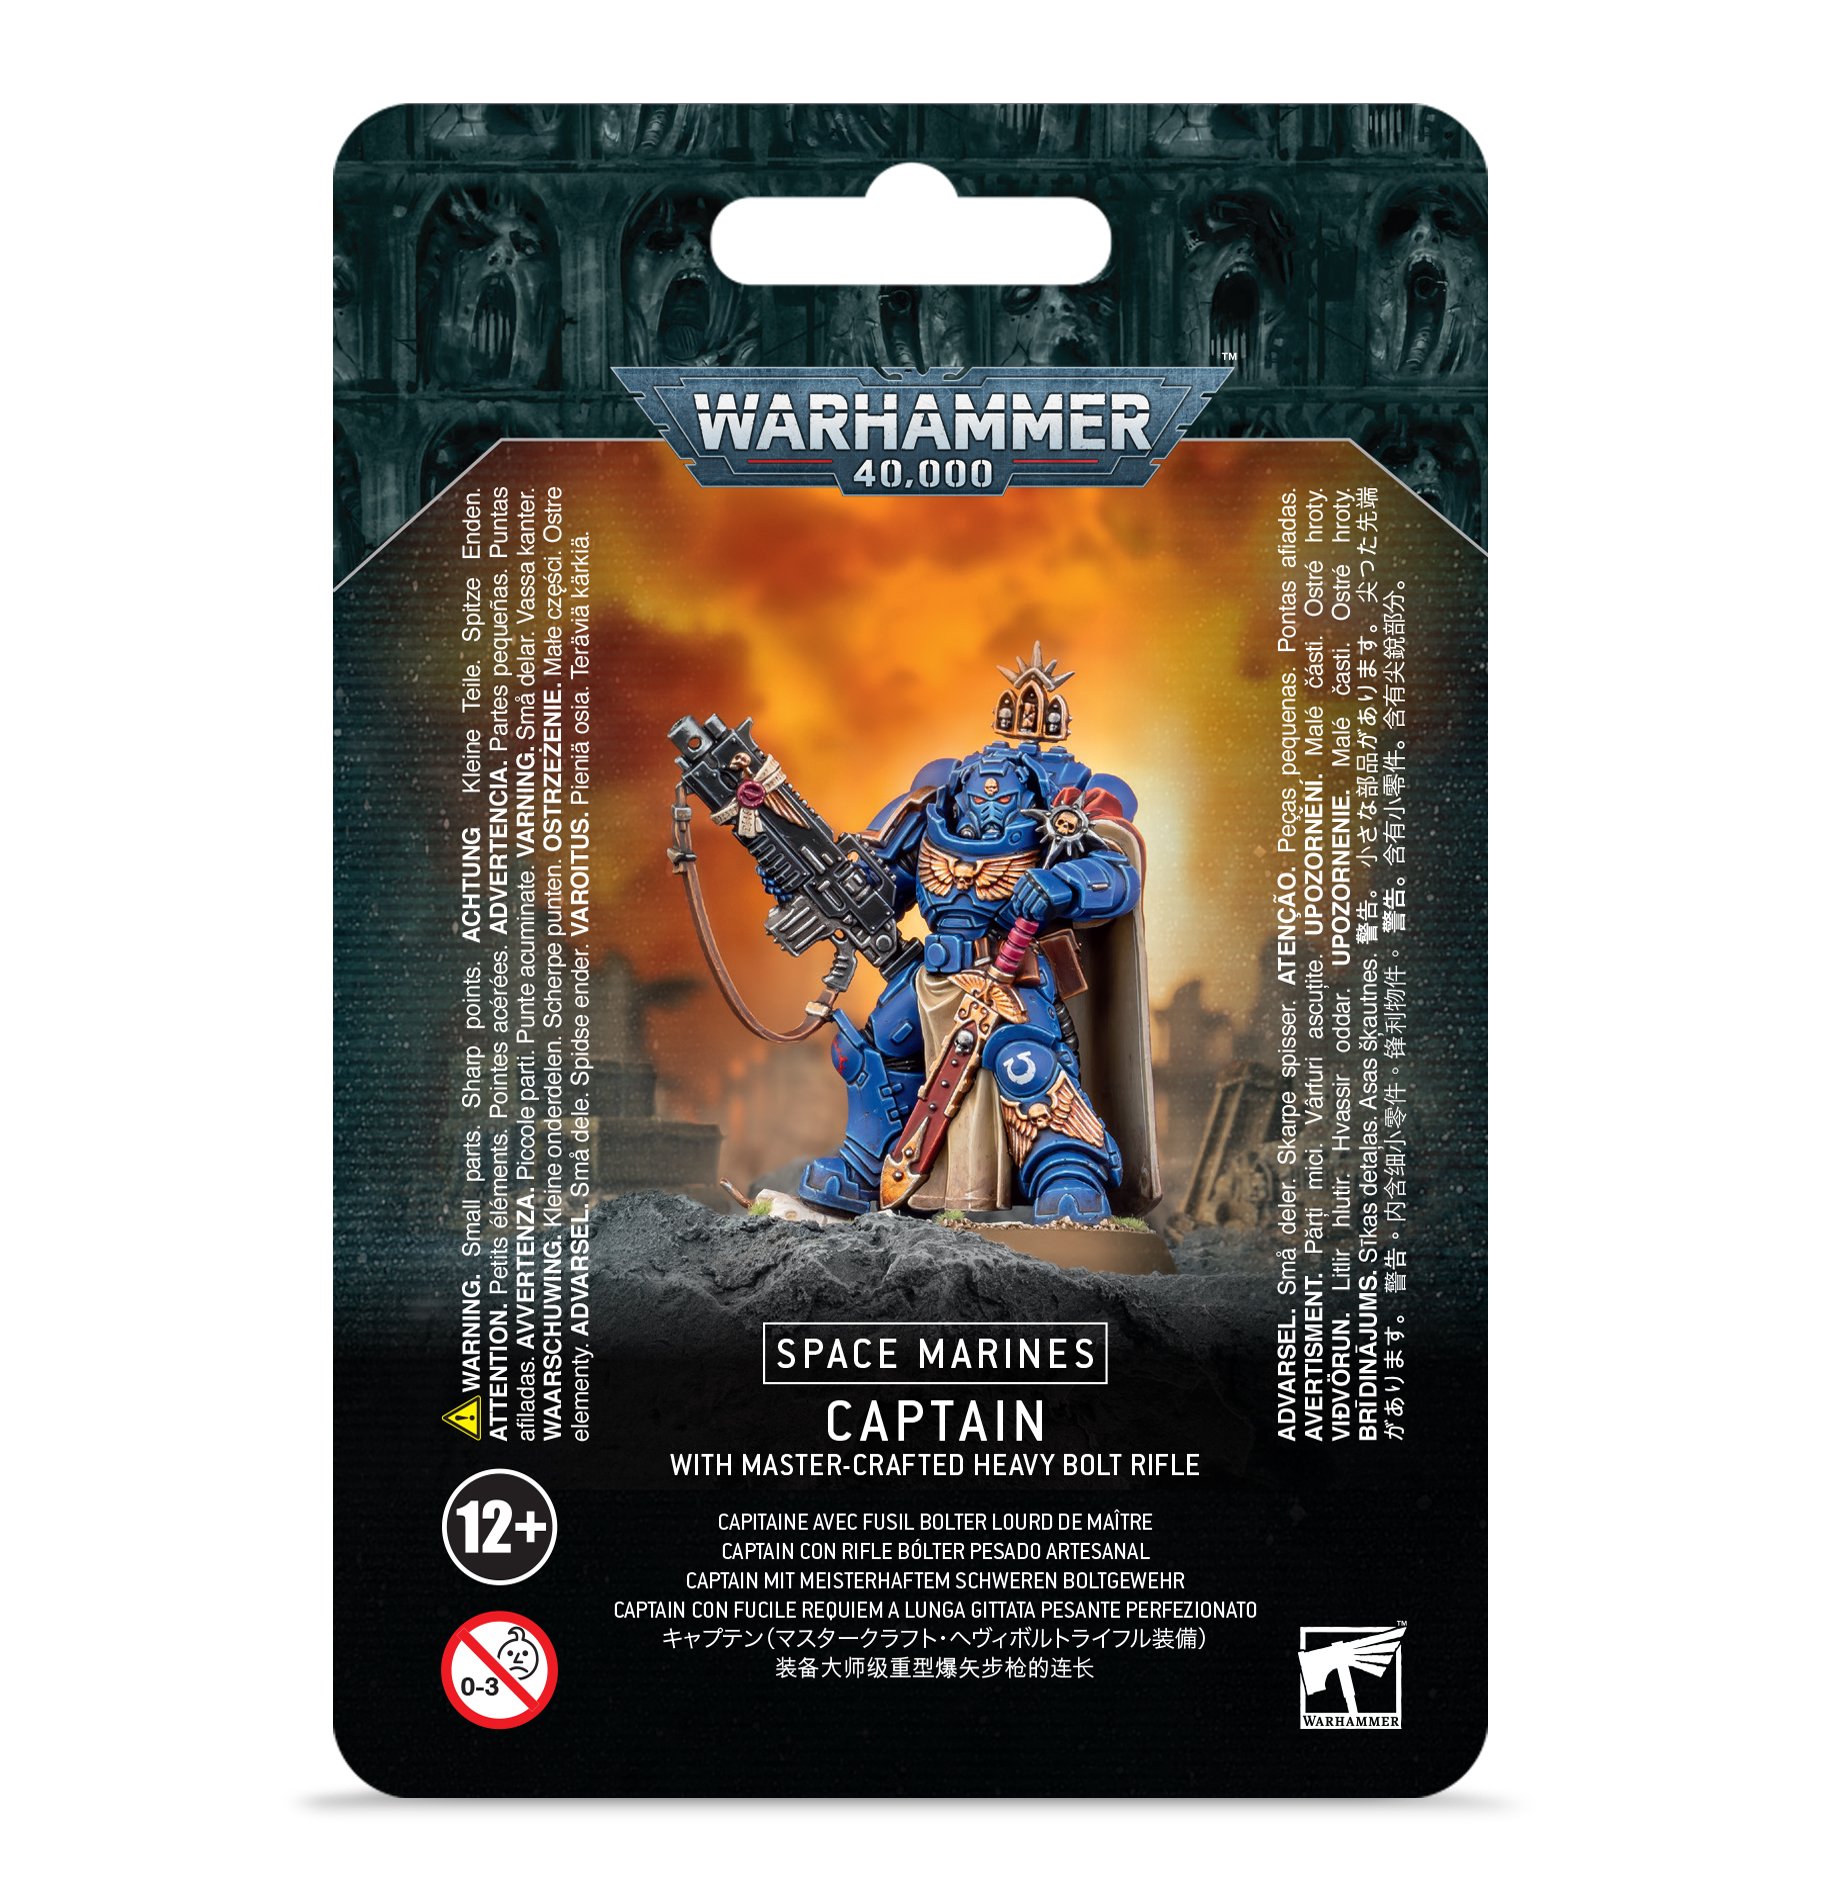 Warhammer 40,000: Space Marines: Captain with Master-Crafted Heavy Bolt Rifle 